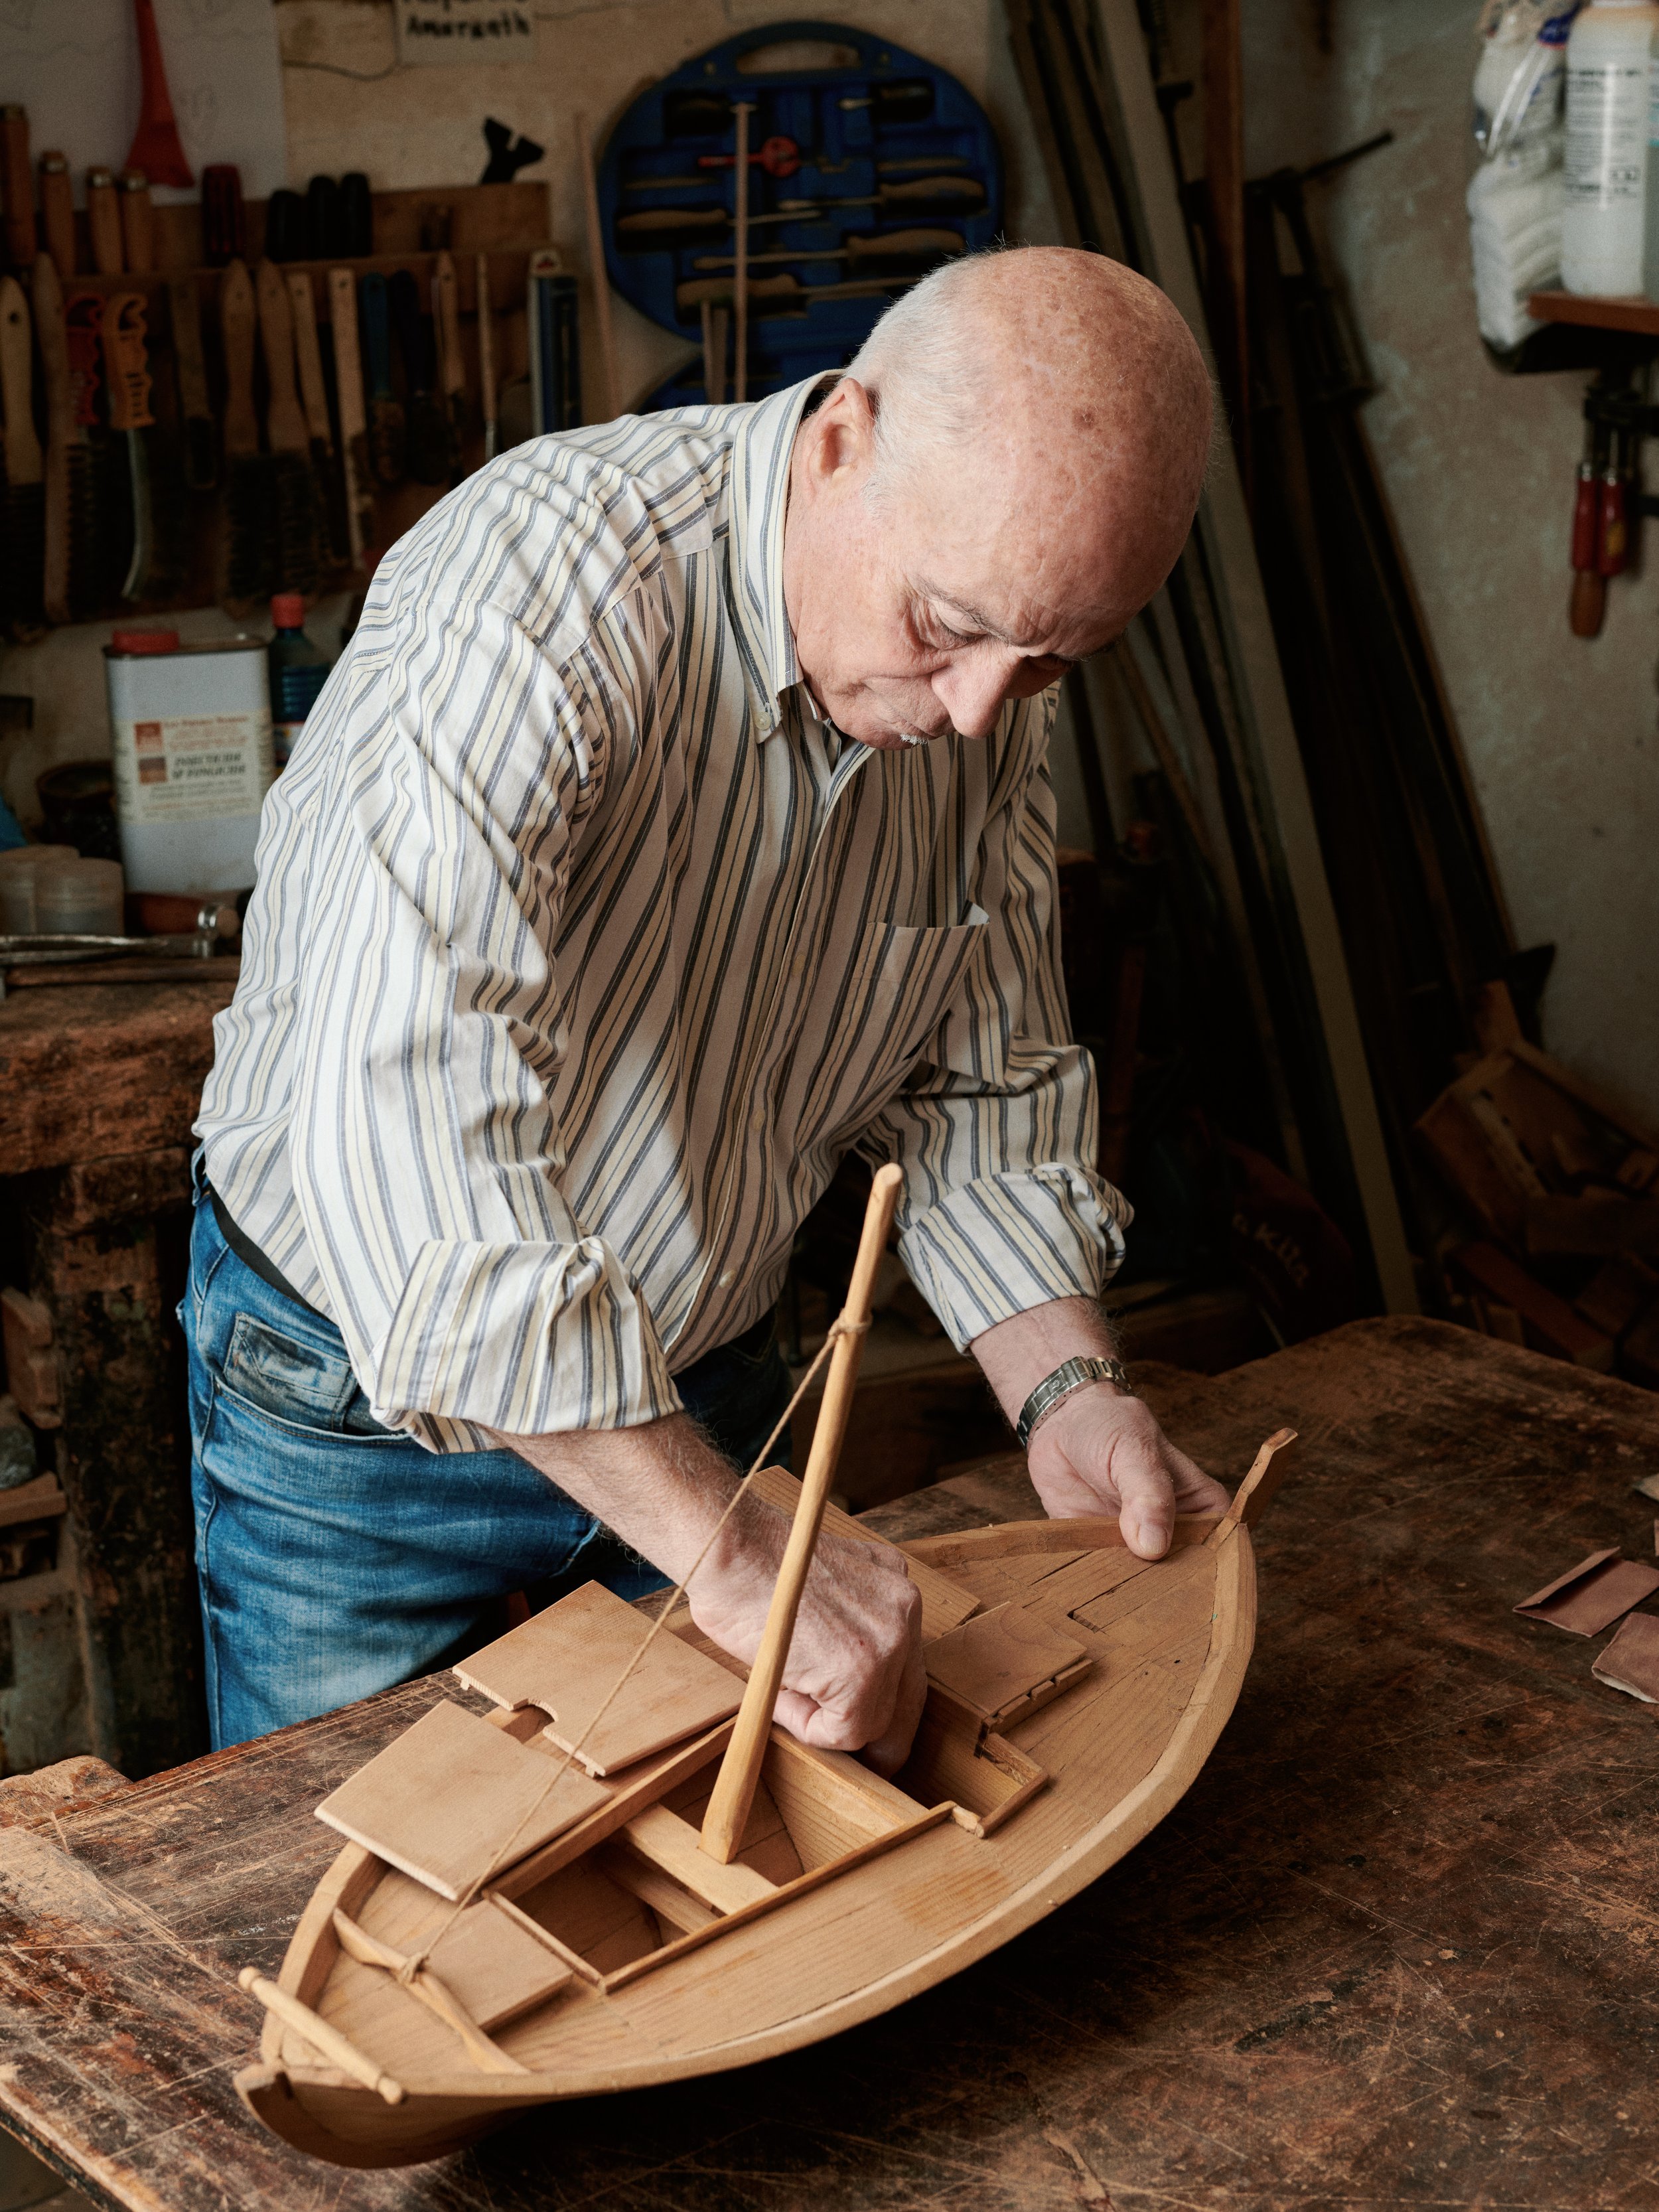   Miltiadis Vithoulkas, the father of George I, specialized in the creation of small-scale boats with fine-precision detail  